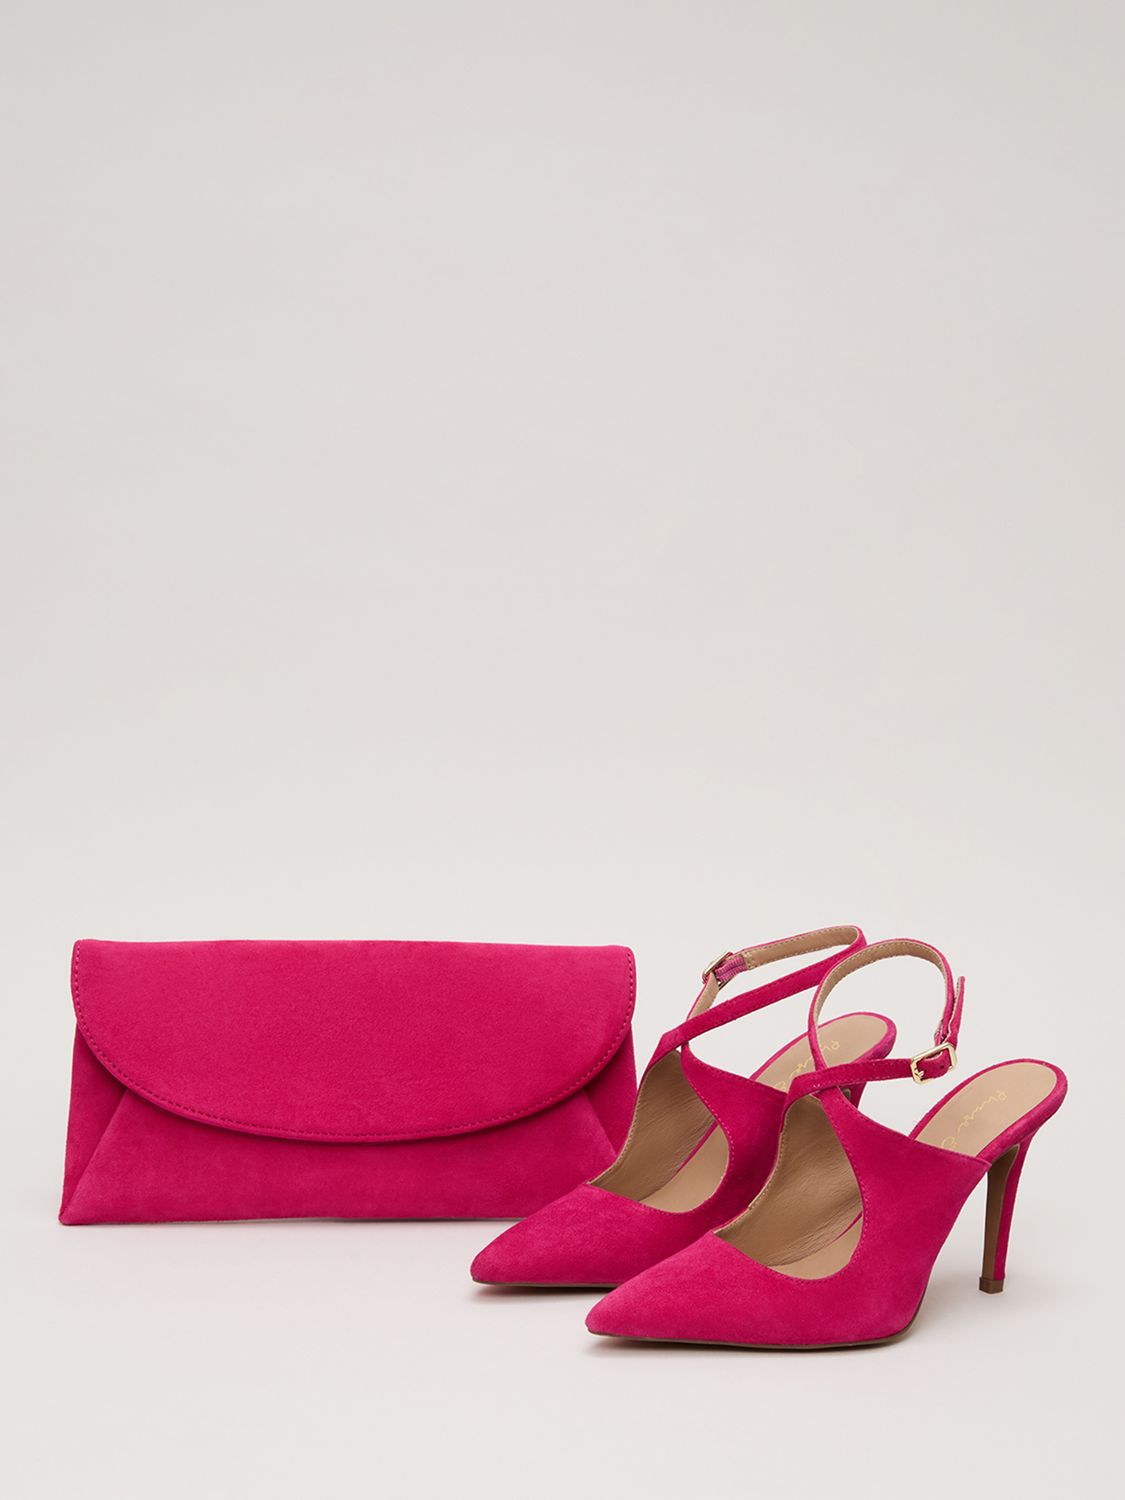 Phase Eight Cross Strap Open Back Suede Shoes, Pink, EU36